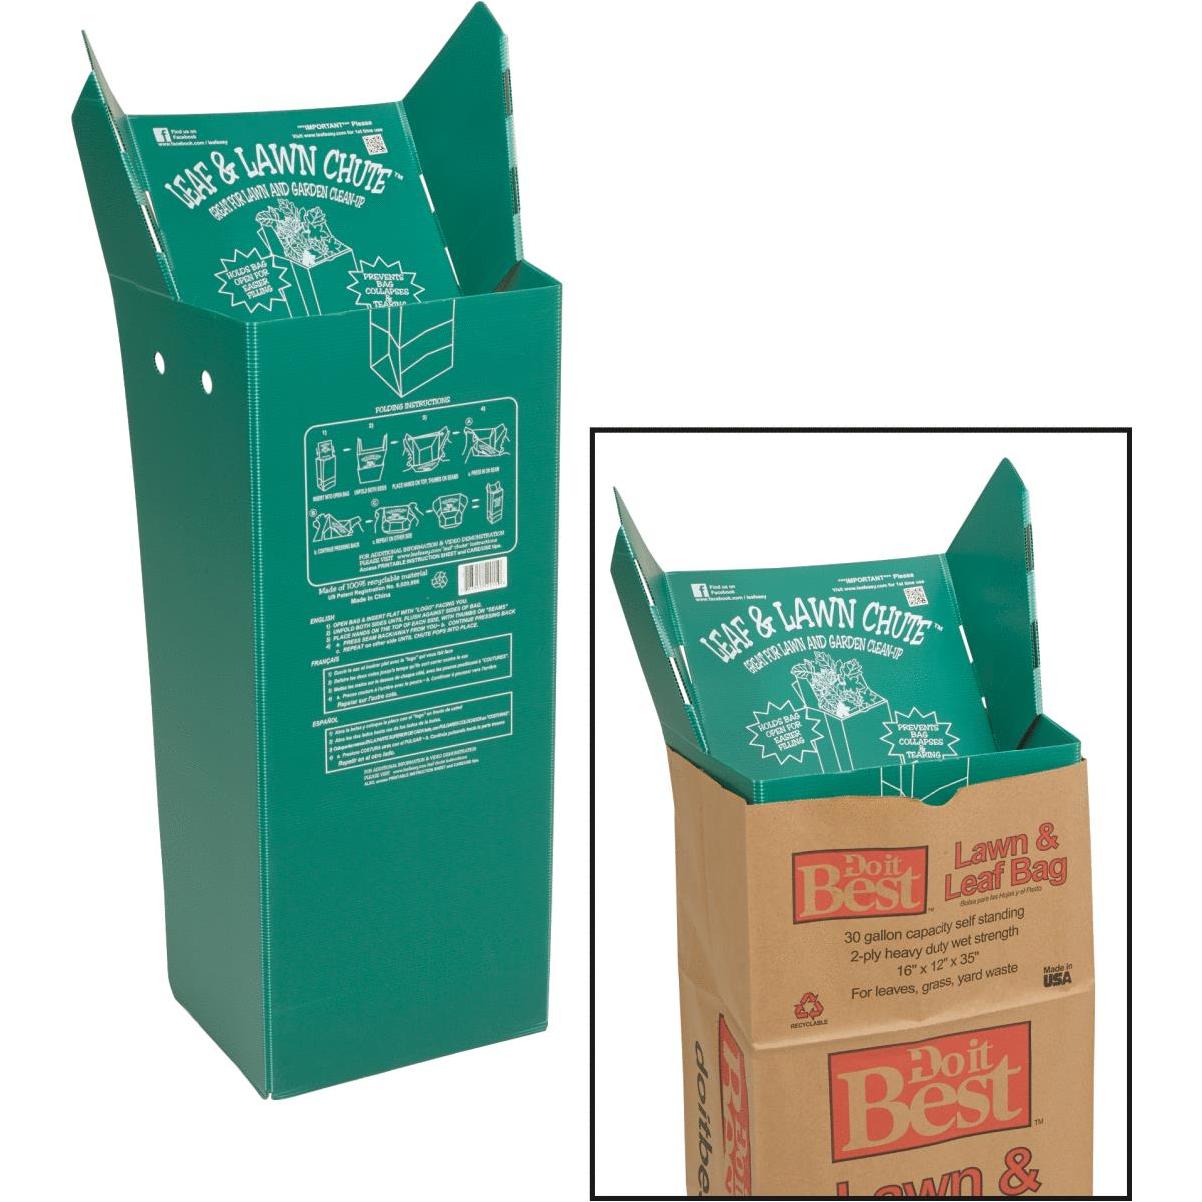 Duro 30 Gallon Self-Standing 2-Ply Printed Natural Kraft Paper Lawn and Leaf  Bag 22453 - 60/Case